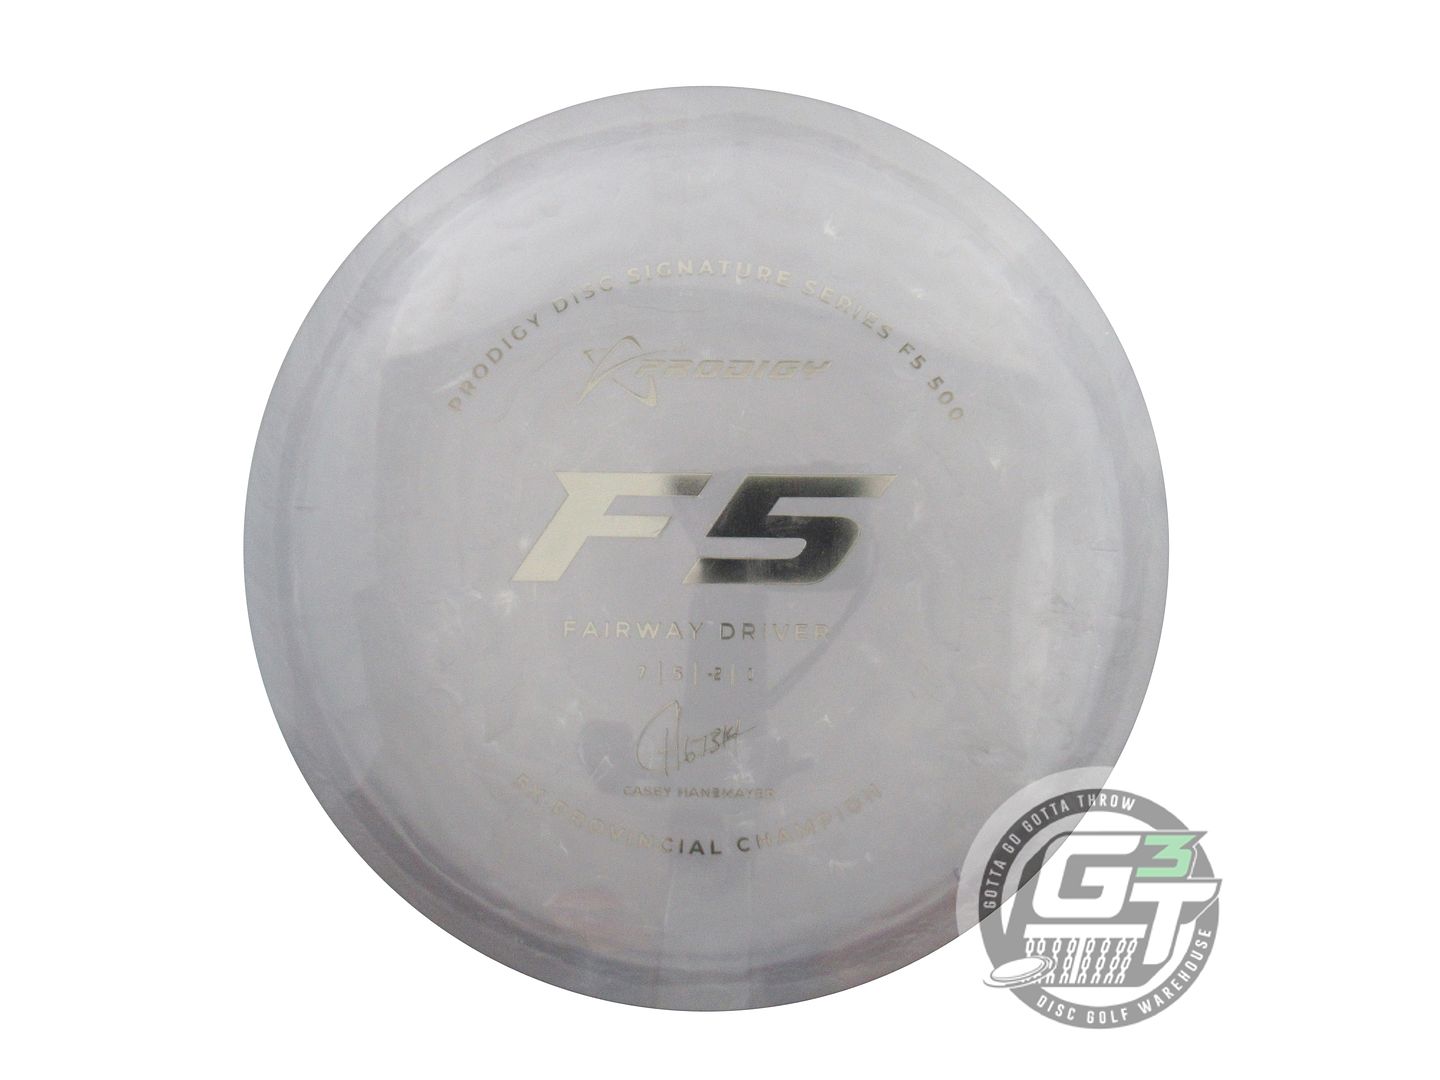 Prodigy Limited Edition 2022 Signature Series Casey Hanemayer 500 Series F5 Fairway Driver Golf Disc (Individually Listed)